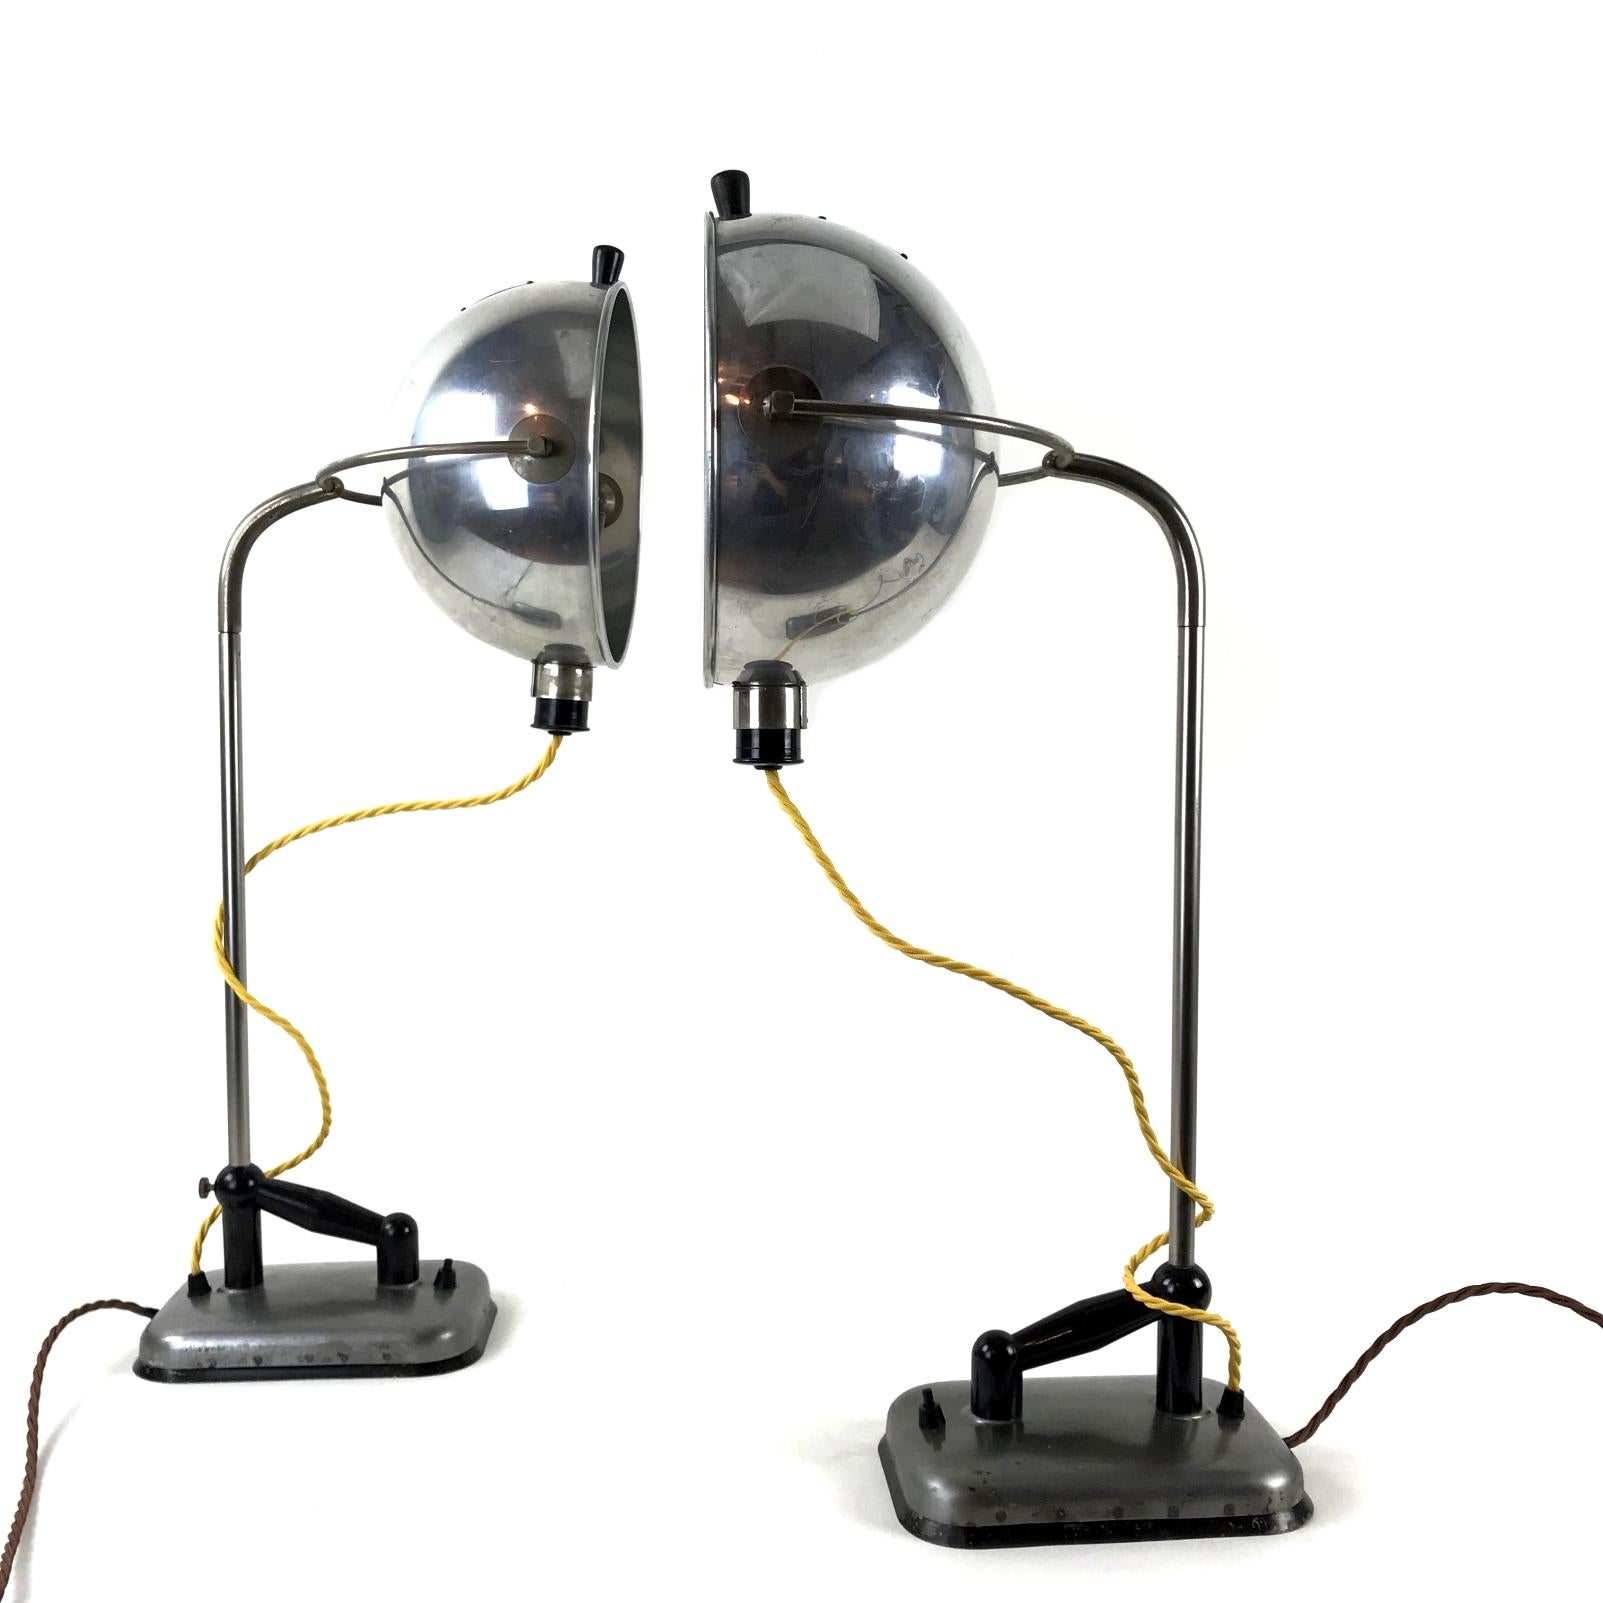 Industrial style Bauhaus table lamp made by Original Hanau in 1930s, Germany. Made of polished aluminium, steel and bakelite. The lamp is in excellent condition. Fully working rewired and tested condition. One Edison E27 socket. The lamp works on